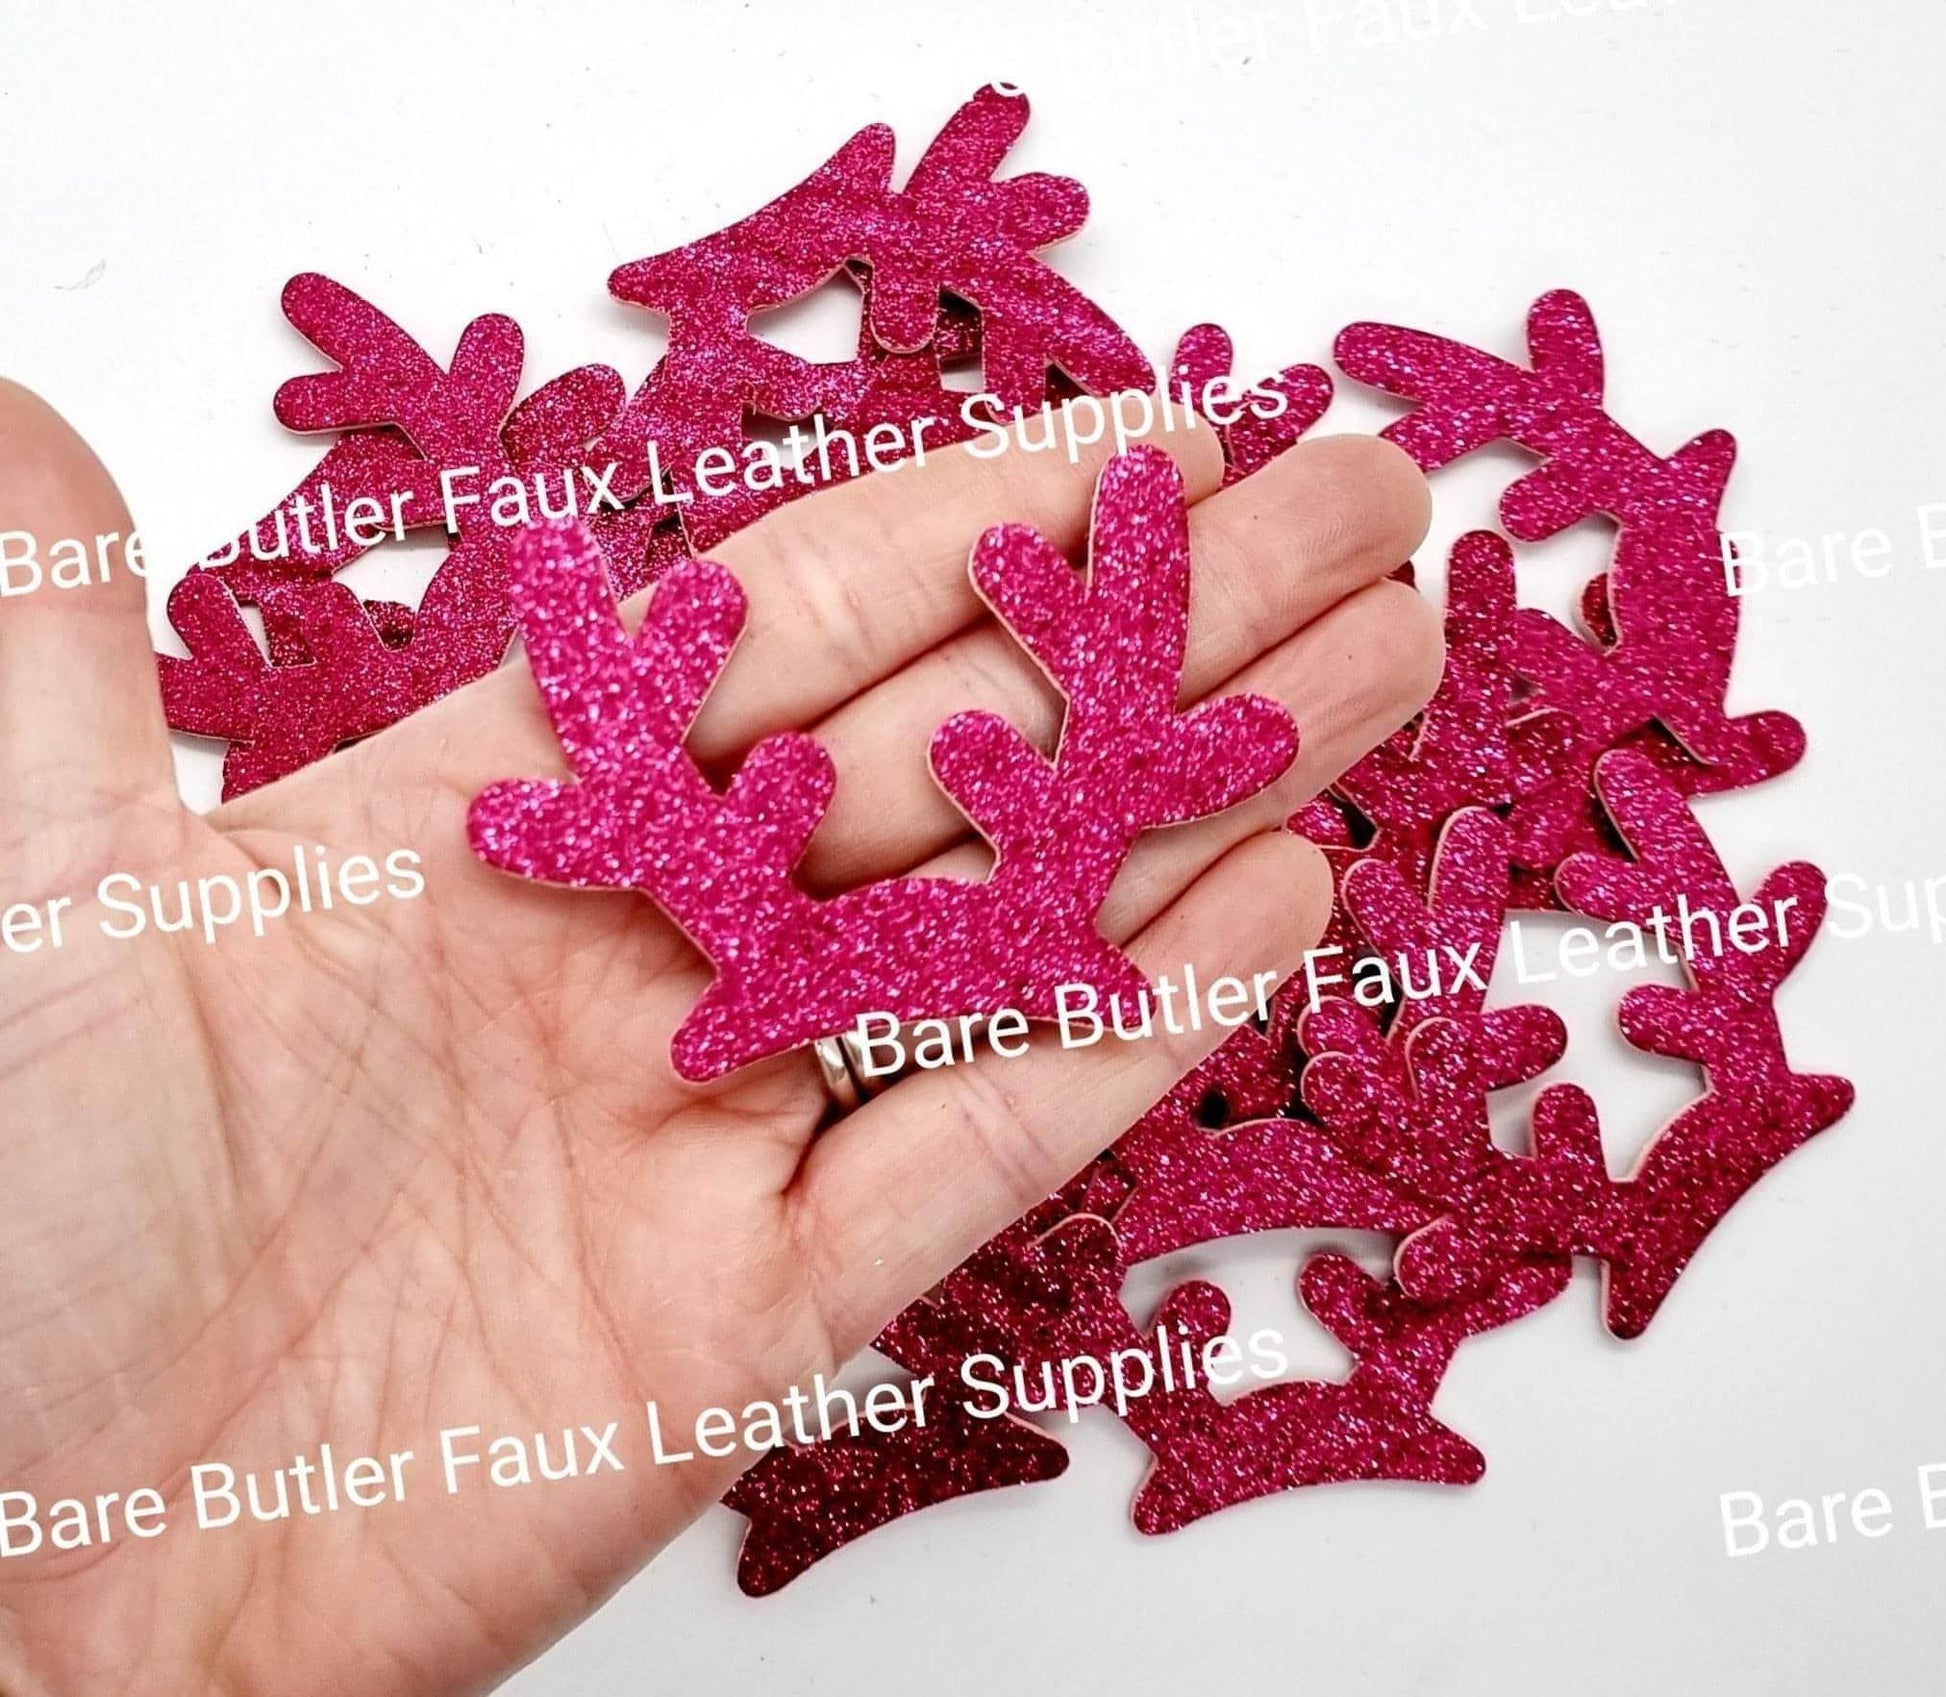 Glitter Antlers - Antlers, christmas, Embelishment - Bare Butler Faux Leather Supplies 